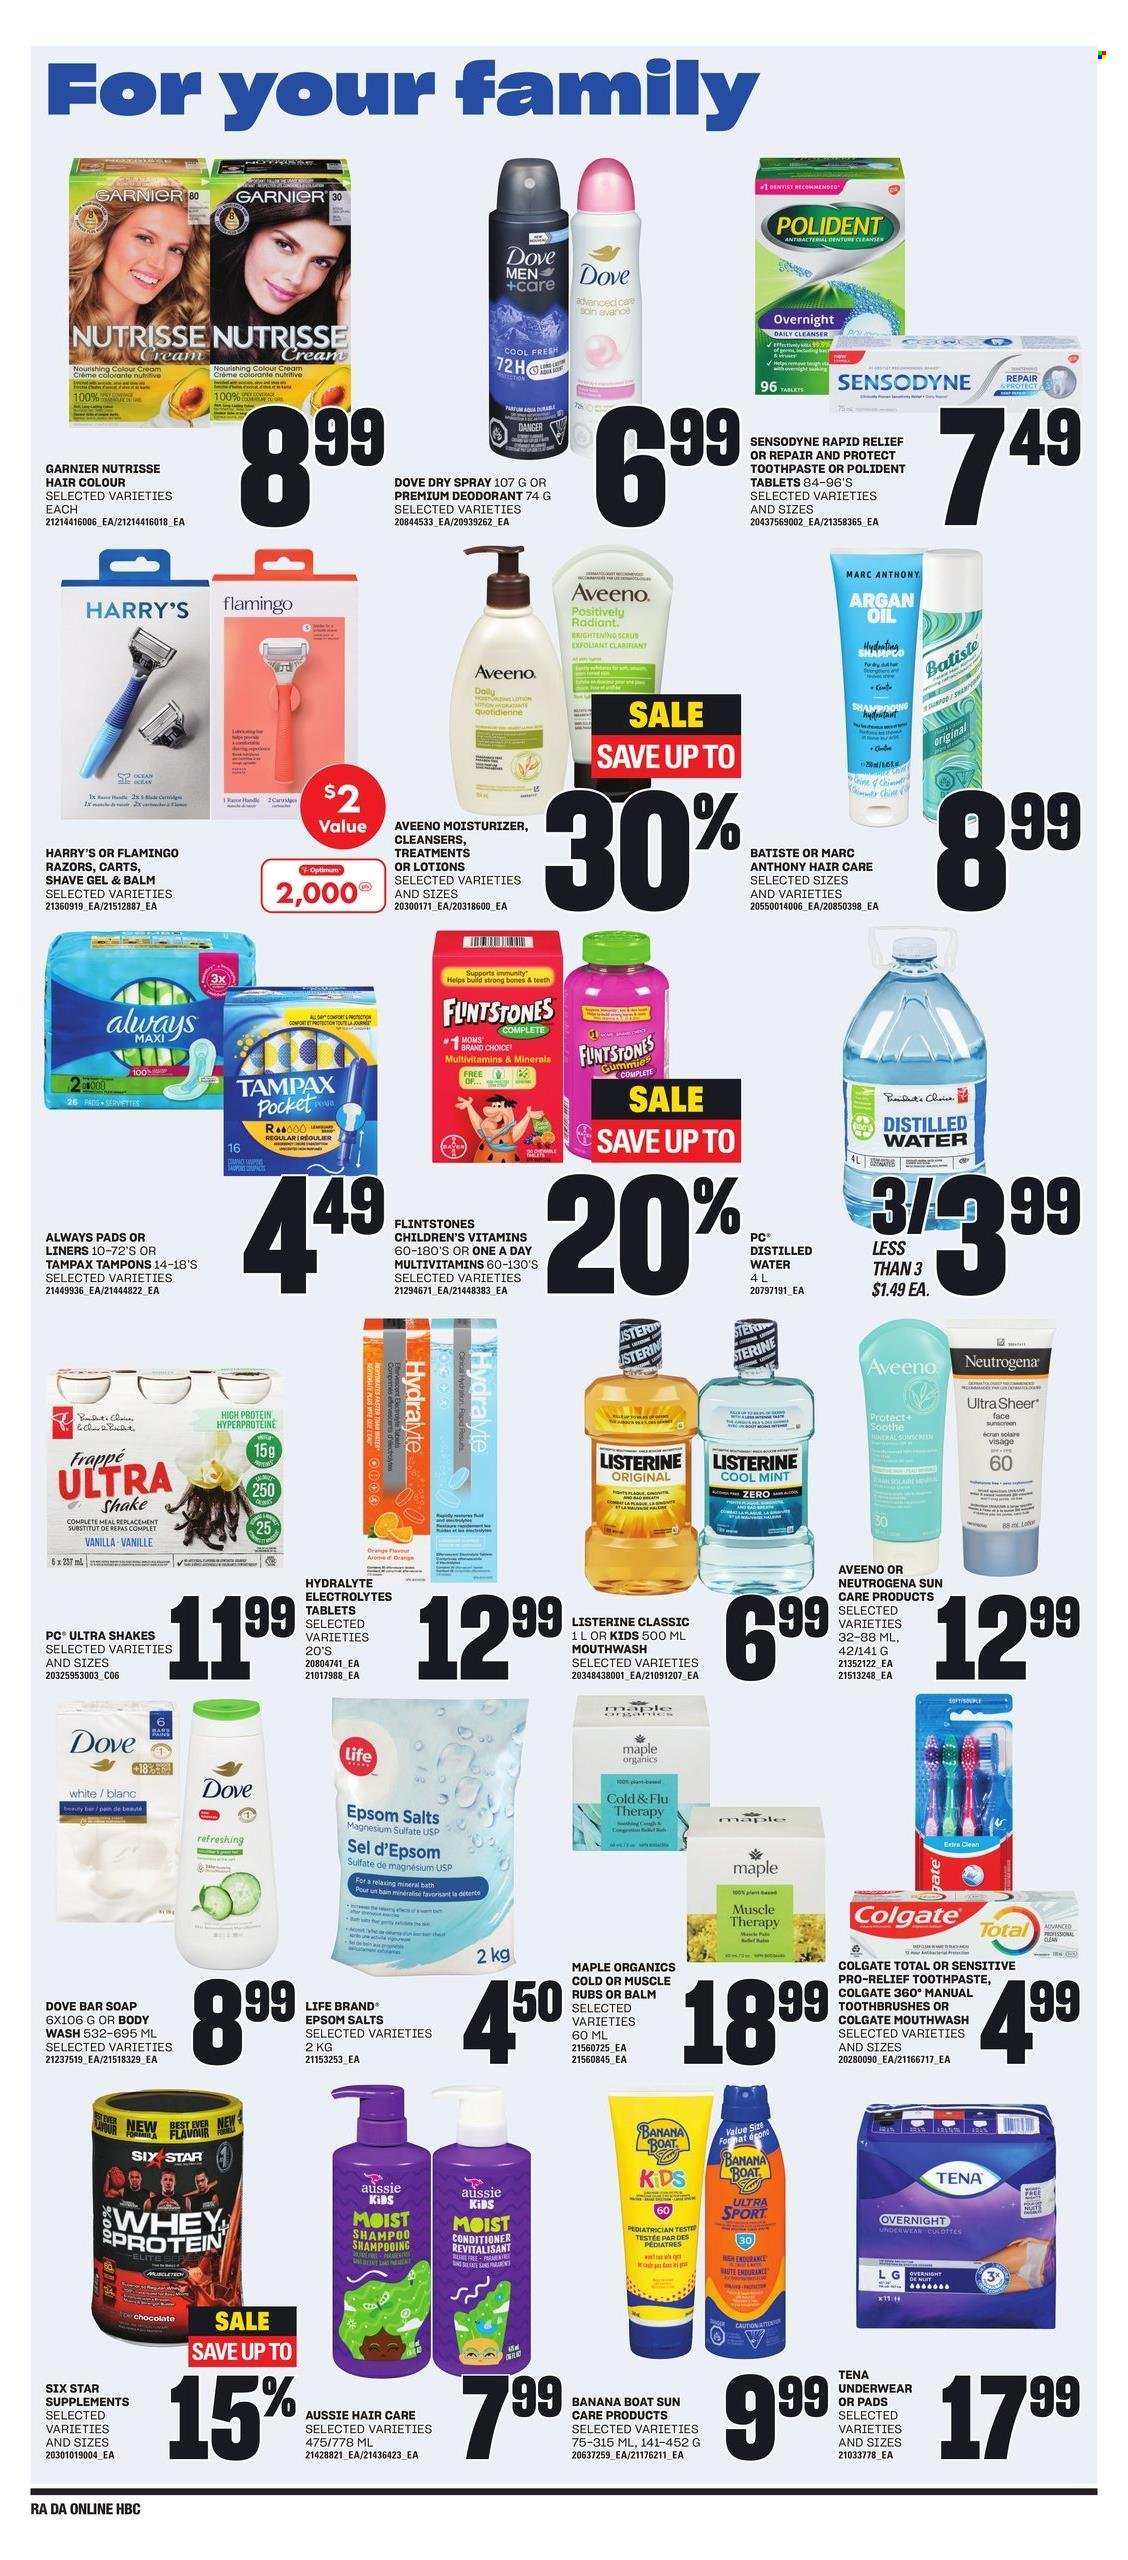 thumbnail - Atlantic Superstore Flyer - July 04, 2024 - July 10, 2024 - Sales products - Dove, Boost, Enfamil, infant milk, Aveeno, Nivea, ointment, pads, shampoo, Softsoap, hand soap, Vaseline, soap, hair products, toothbrush, toothpaste, Polident, Crest, Always pads, sanitary pads, Kotex, tampons, micellar water, moisturizer, Olay, Niacinamide, OGX, skin care product, Aussie, Clairol, conditioner, Nexxus, Herbal Essences, John Frieda, Maui Moisture, Fructis, anti-perspirant, eau de parfum, Speed Stick, deodorant, Biotin, Tylenol, Advil Rapid, aspirin, Motrin, Voltaren, pain therapy, polysporin, plaster, band-aid, Colgate, Garnier, Tampax, Old Spice, Oral-B, Sensodyne. Page 11.